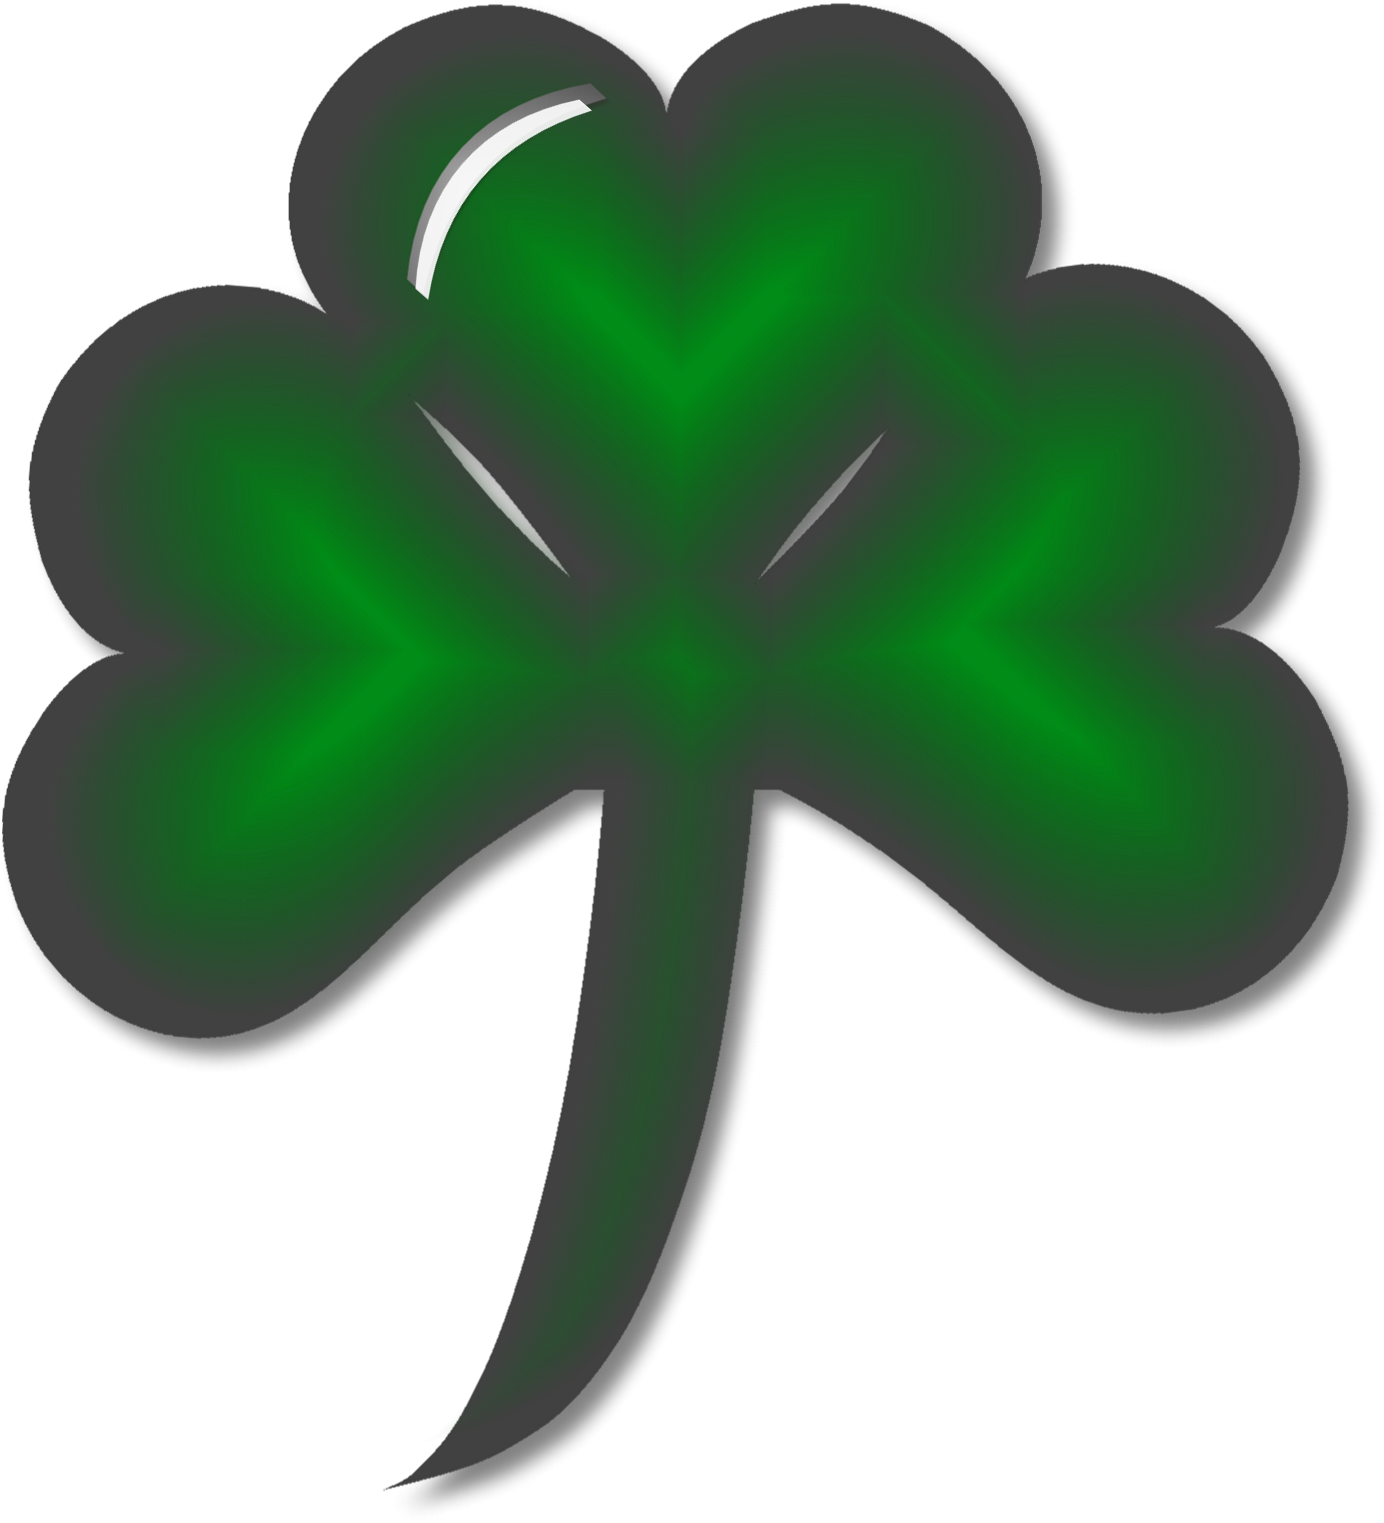 Here Are Some Freebies For Your St - Shamrock (1384x1523)